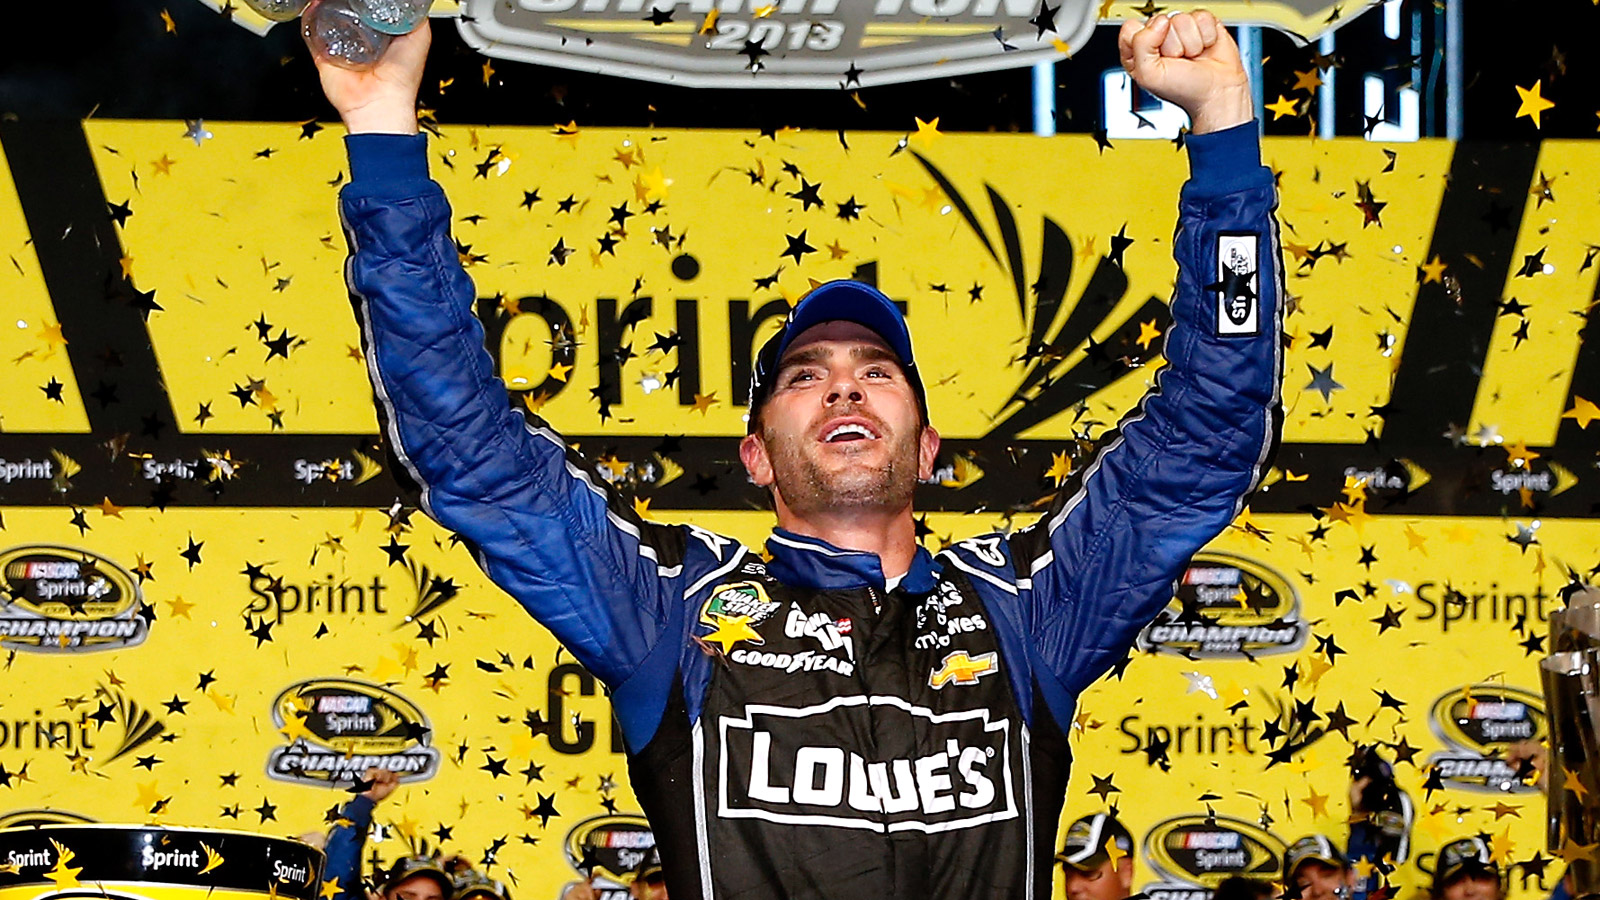 The greatest driver our sport has ever seen: Jimmie Johnson